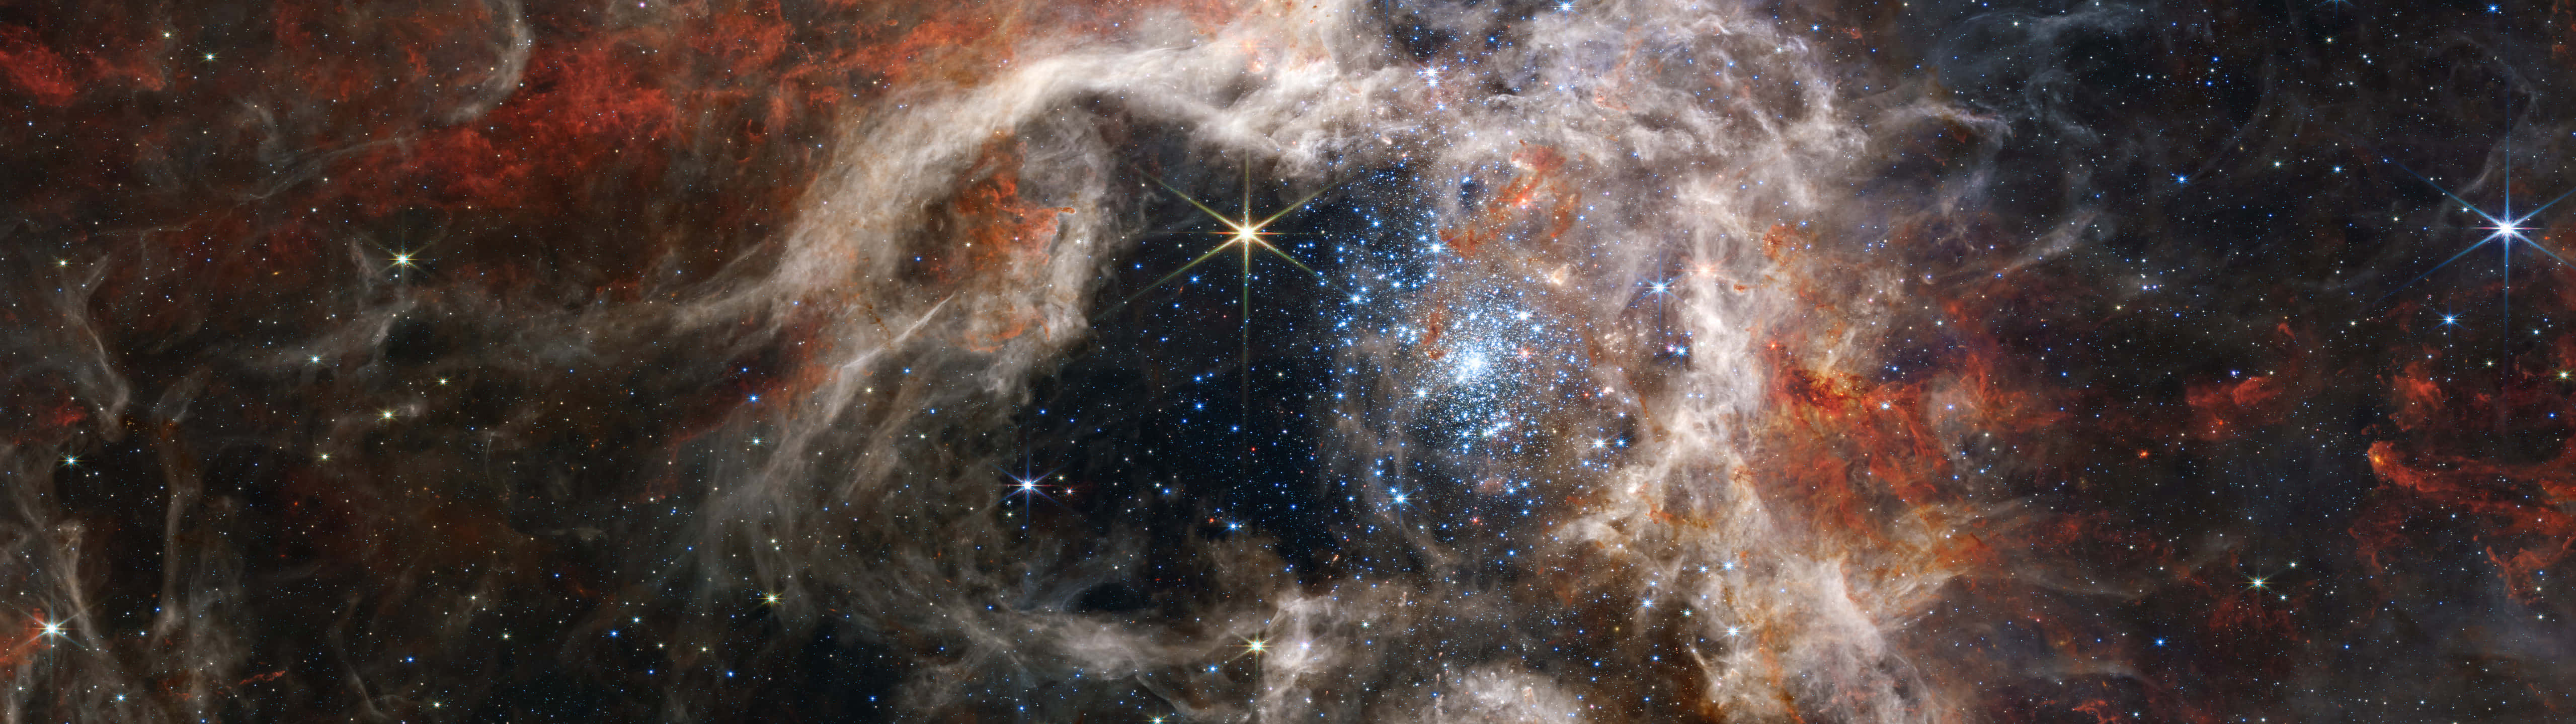 A Space Image Of A Star Cluster Wallpaper